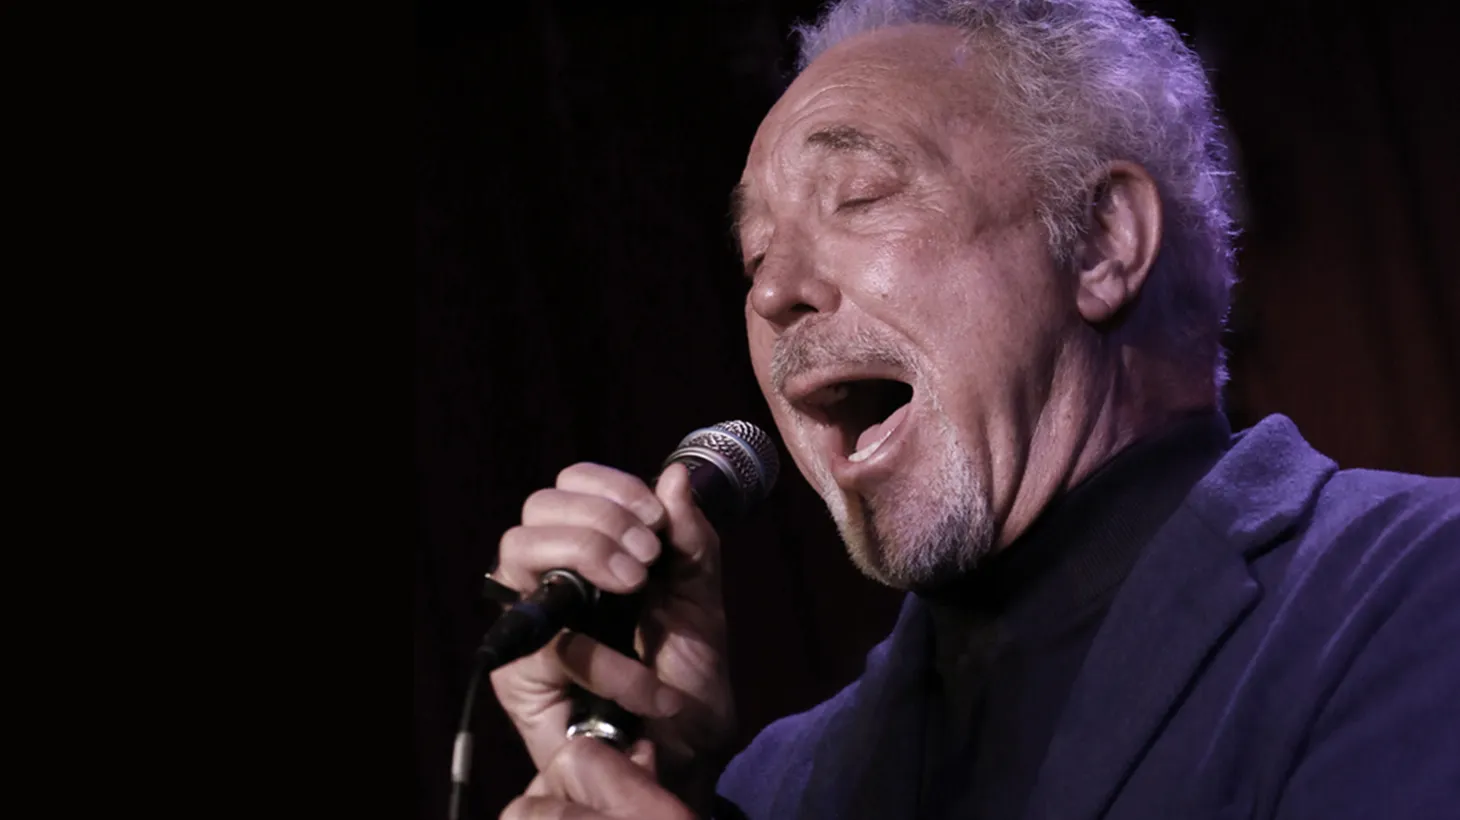 Sir Tom Jones has sold over 100 million records and just released his autobiography and a new album, Long Lost Suitcase. At 75, he sounds better than ever.